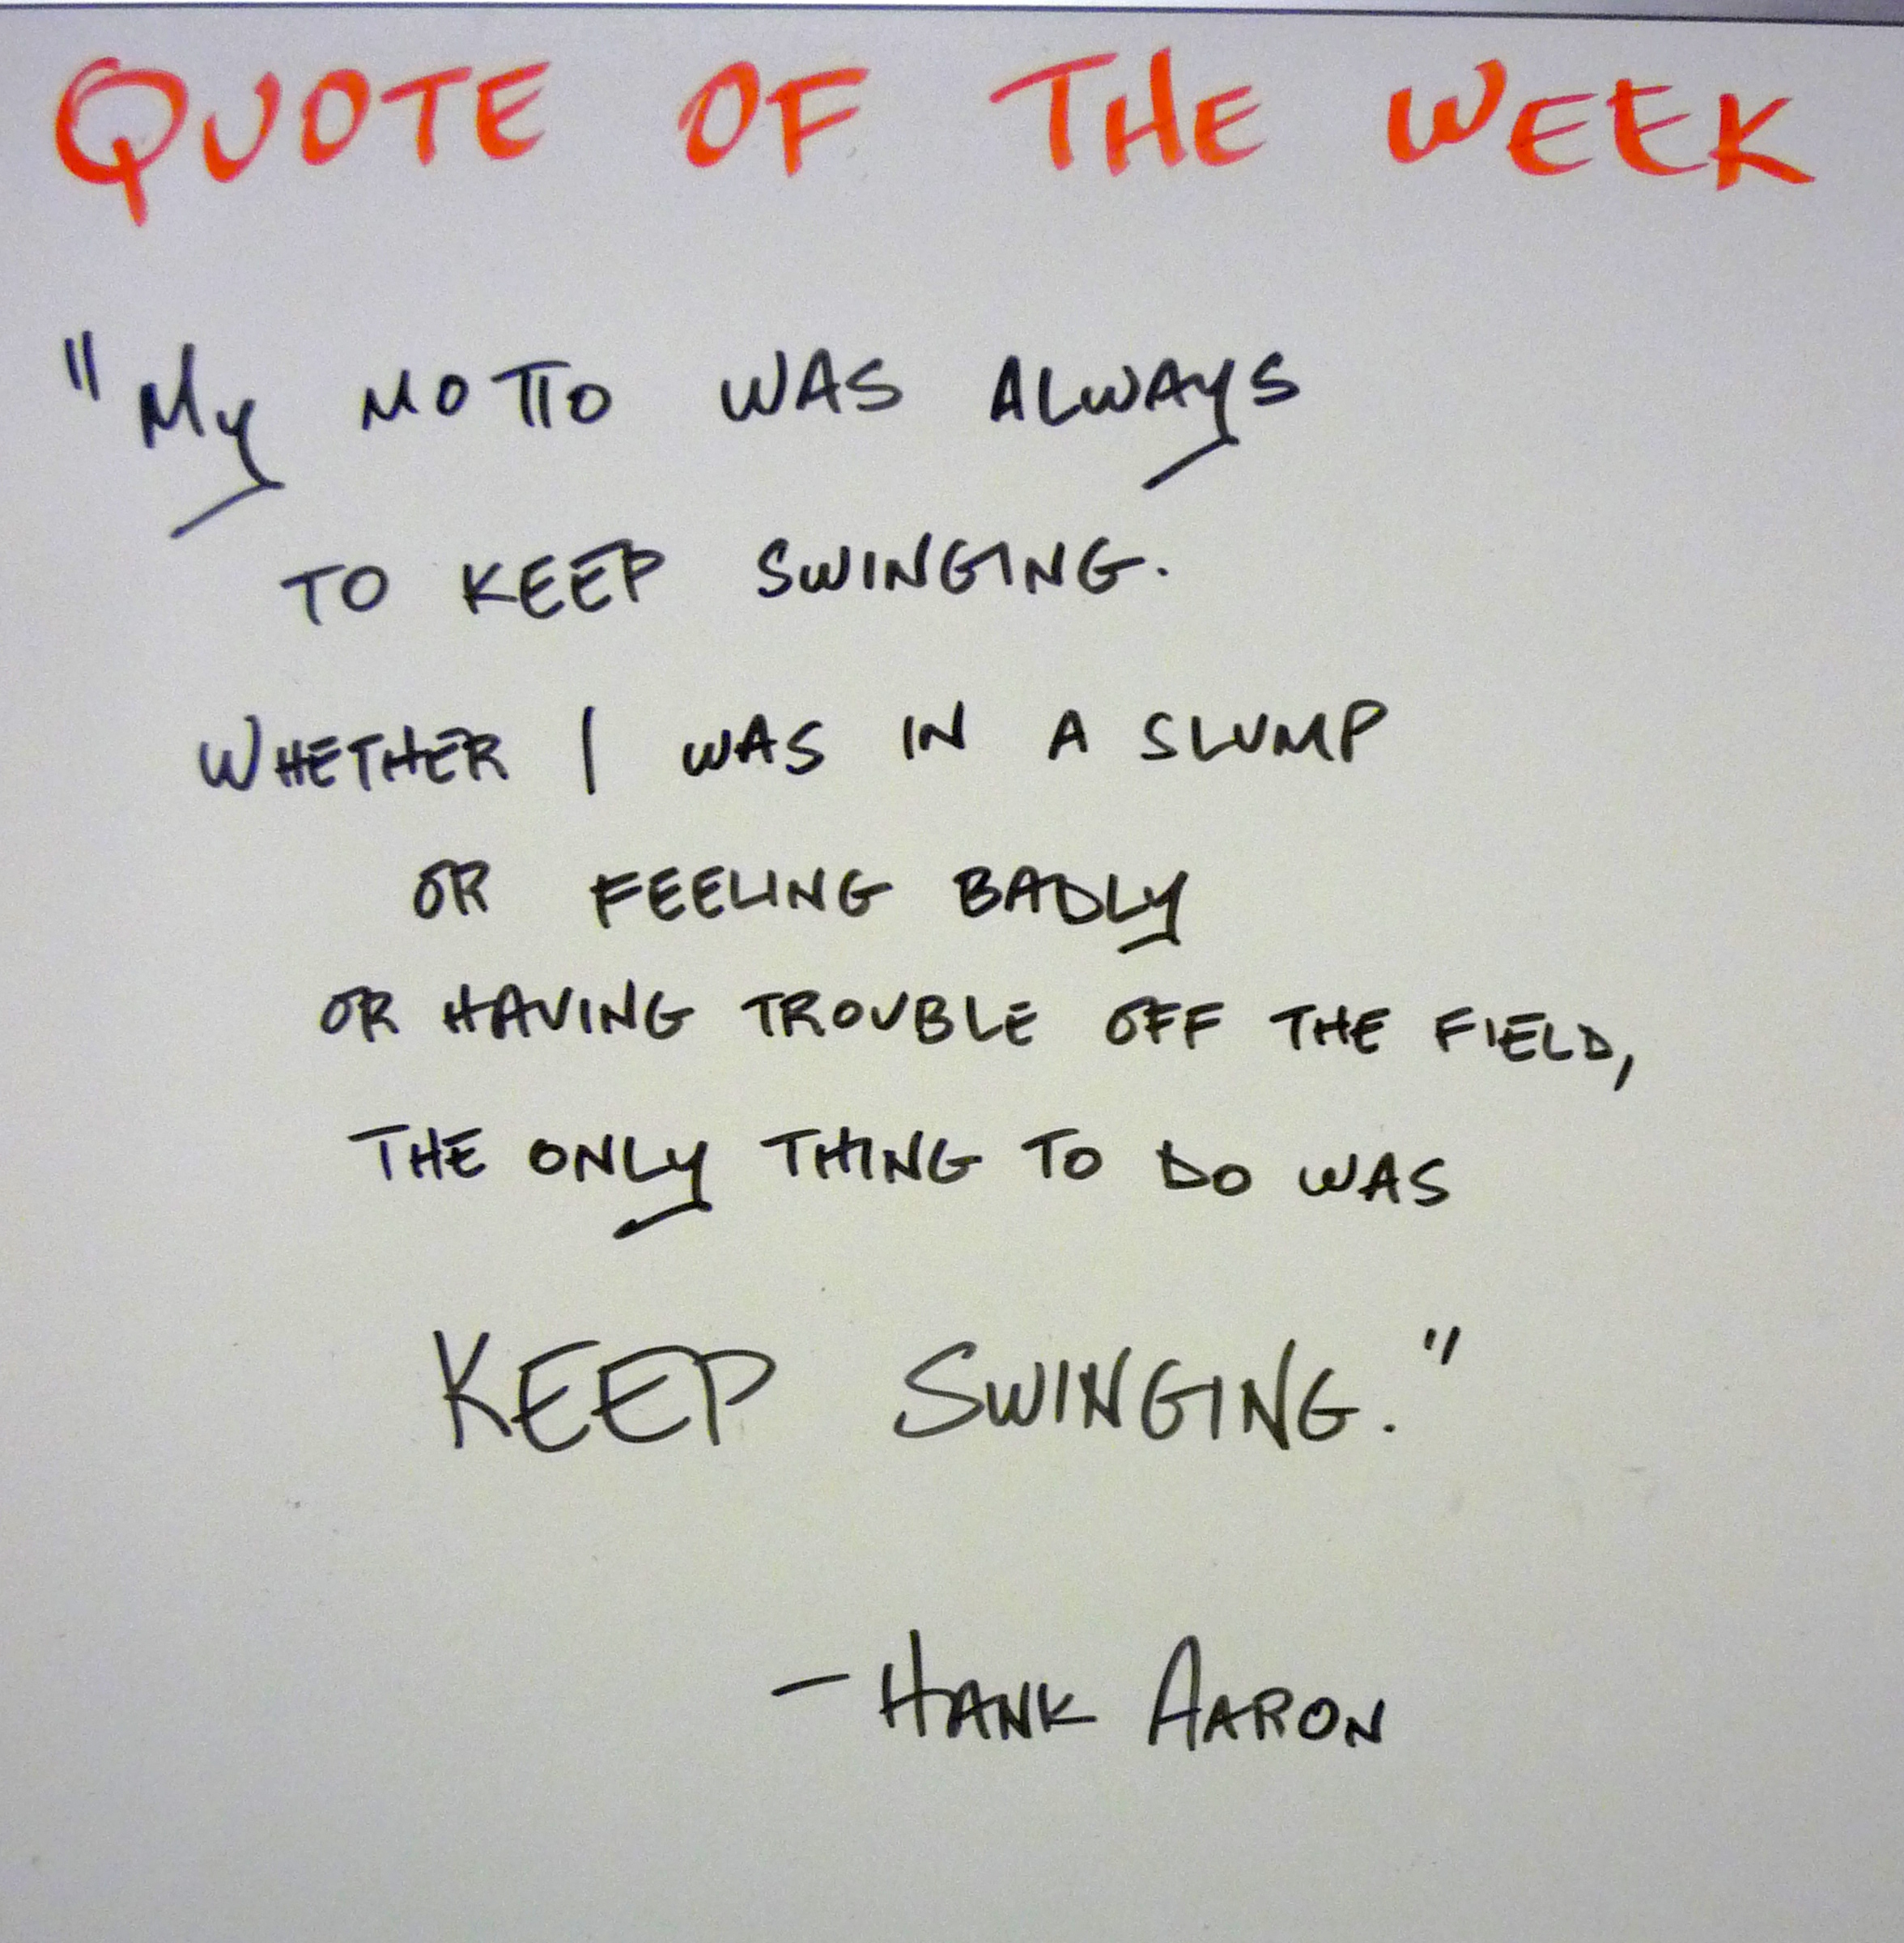 Quote of the week: Hank Aaron on hanging in there